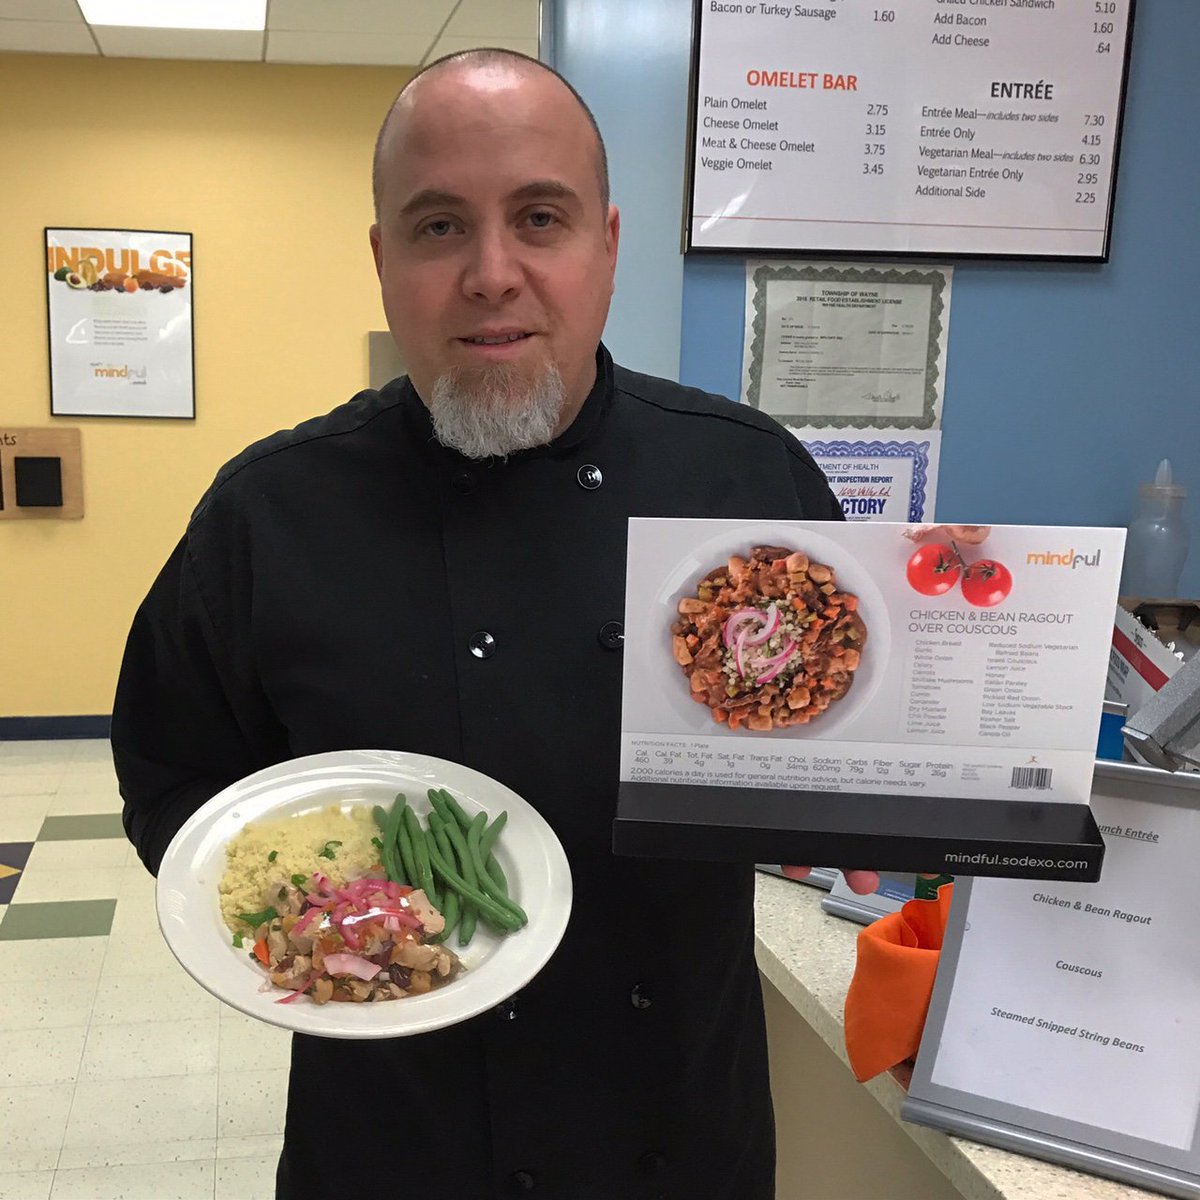 Today at Valley Road's Cafe 1600.. Mindful Meal of Chicken & Bean Ragout over Couscous with String Beans #wpu #wpunj #mindfulmeals #wpueats